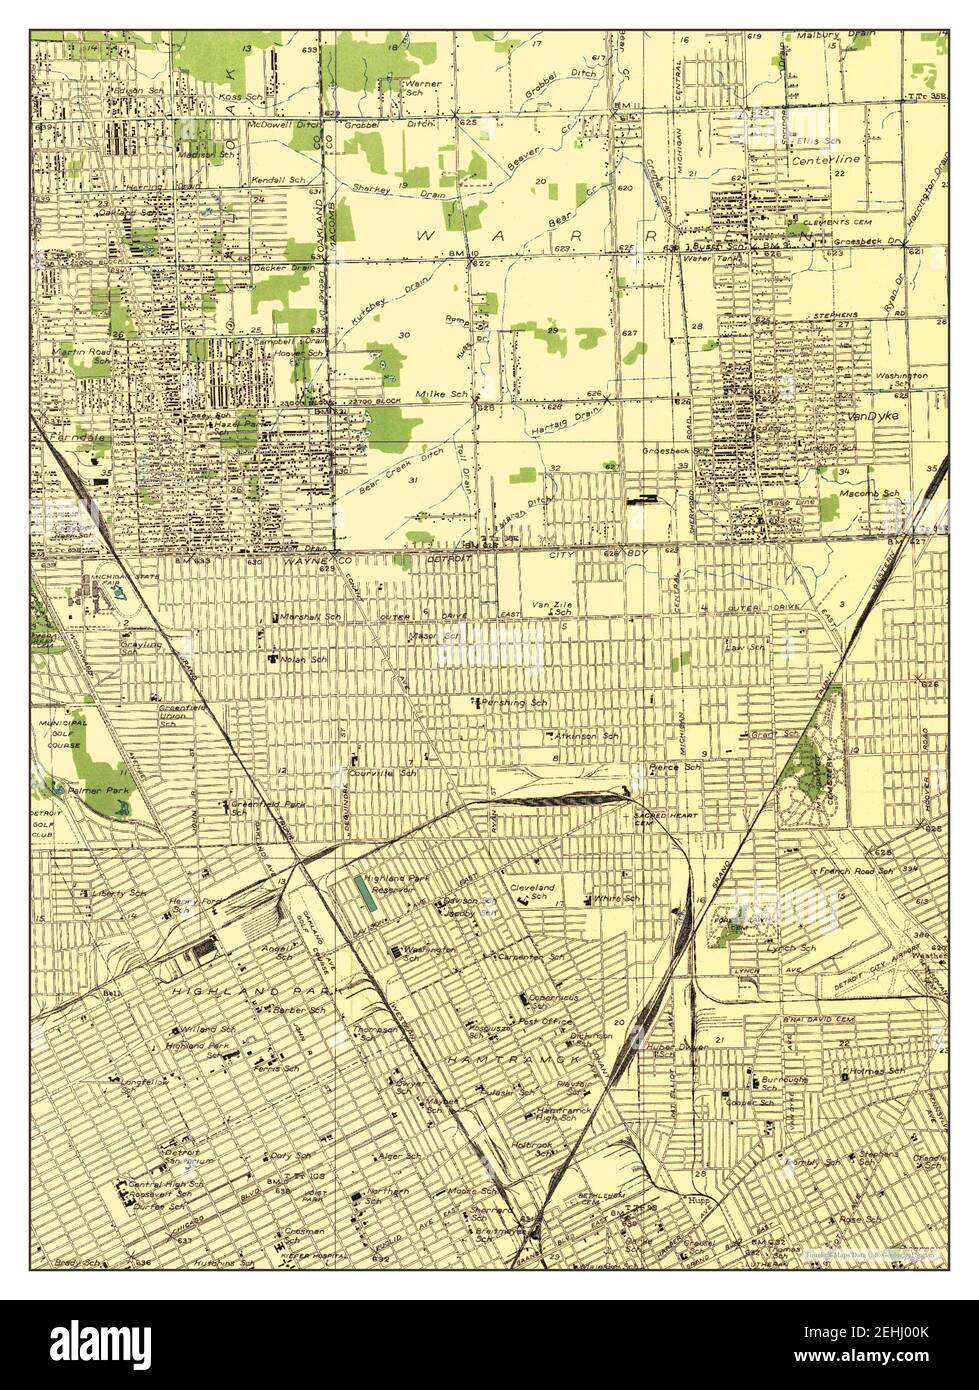 Highland Park, Michigan, map 1936, 1:31680, United States of America by Timeless Maps, data U.S. Geological Survey Stock Photo